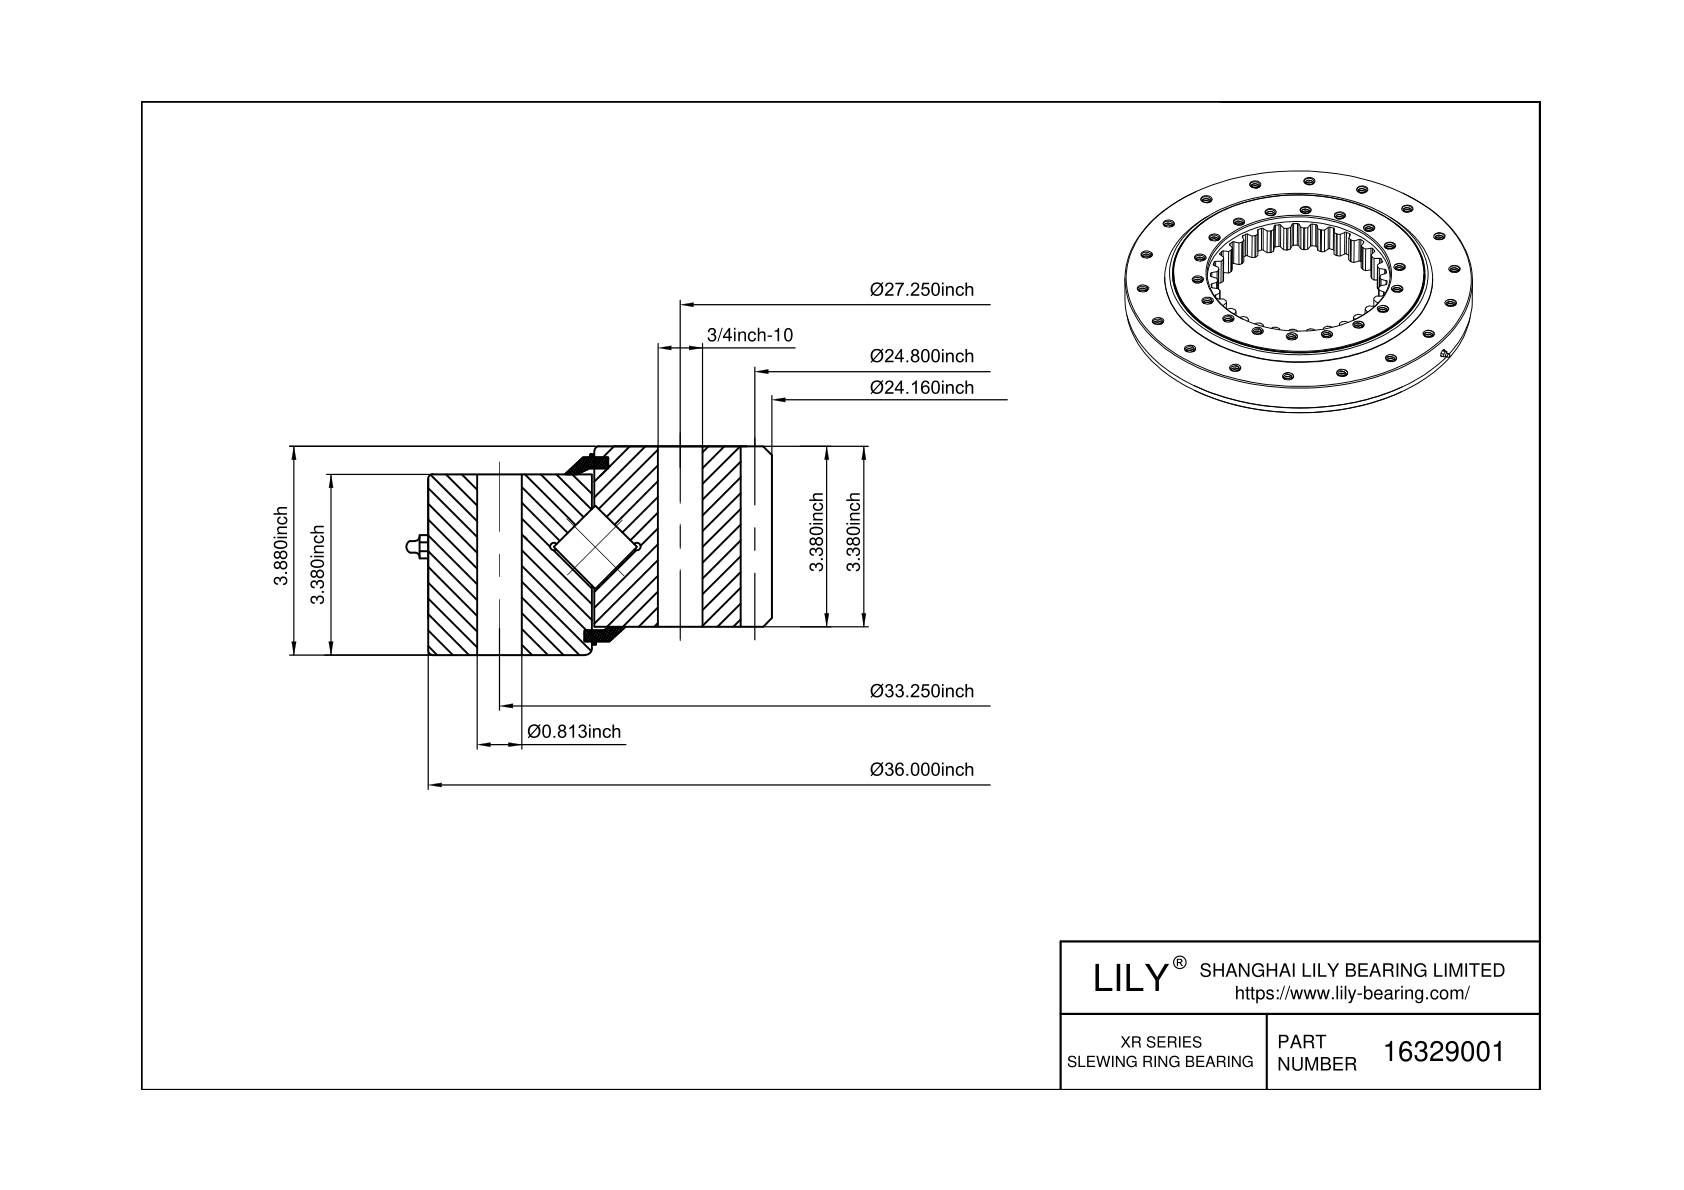 16329001 XR Series cad drawing